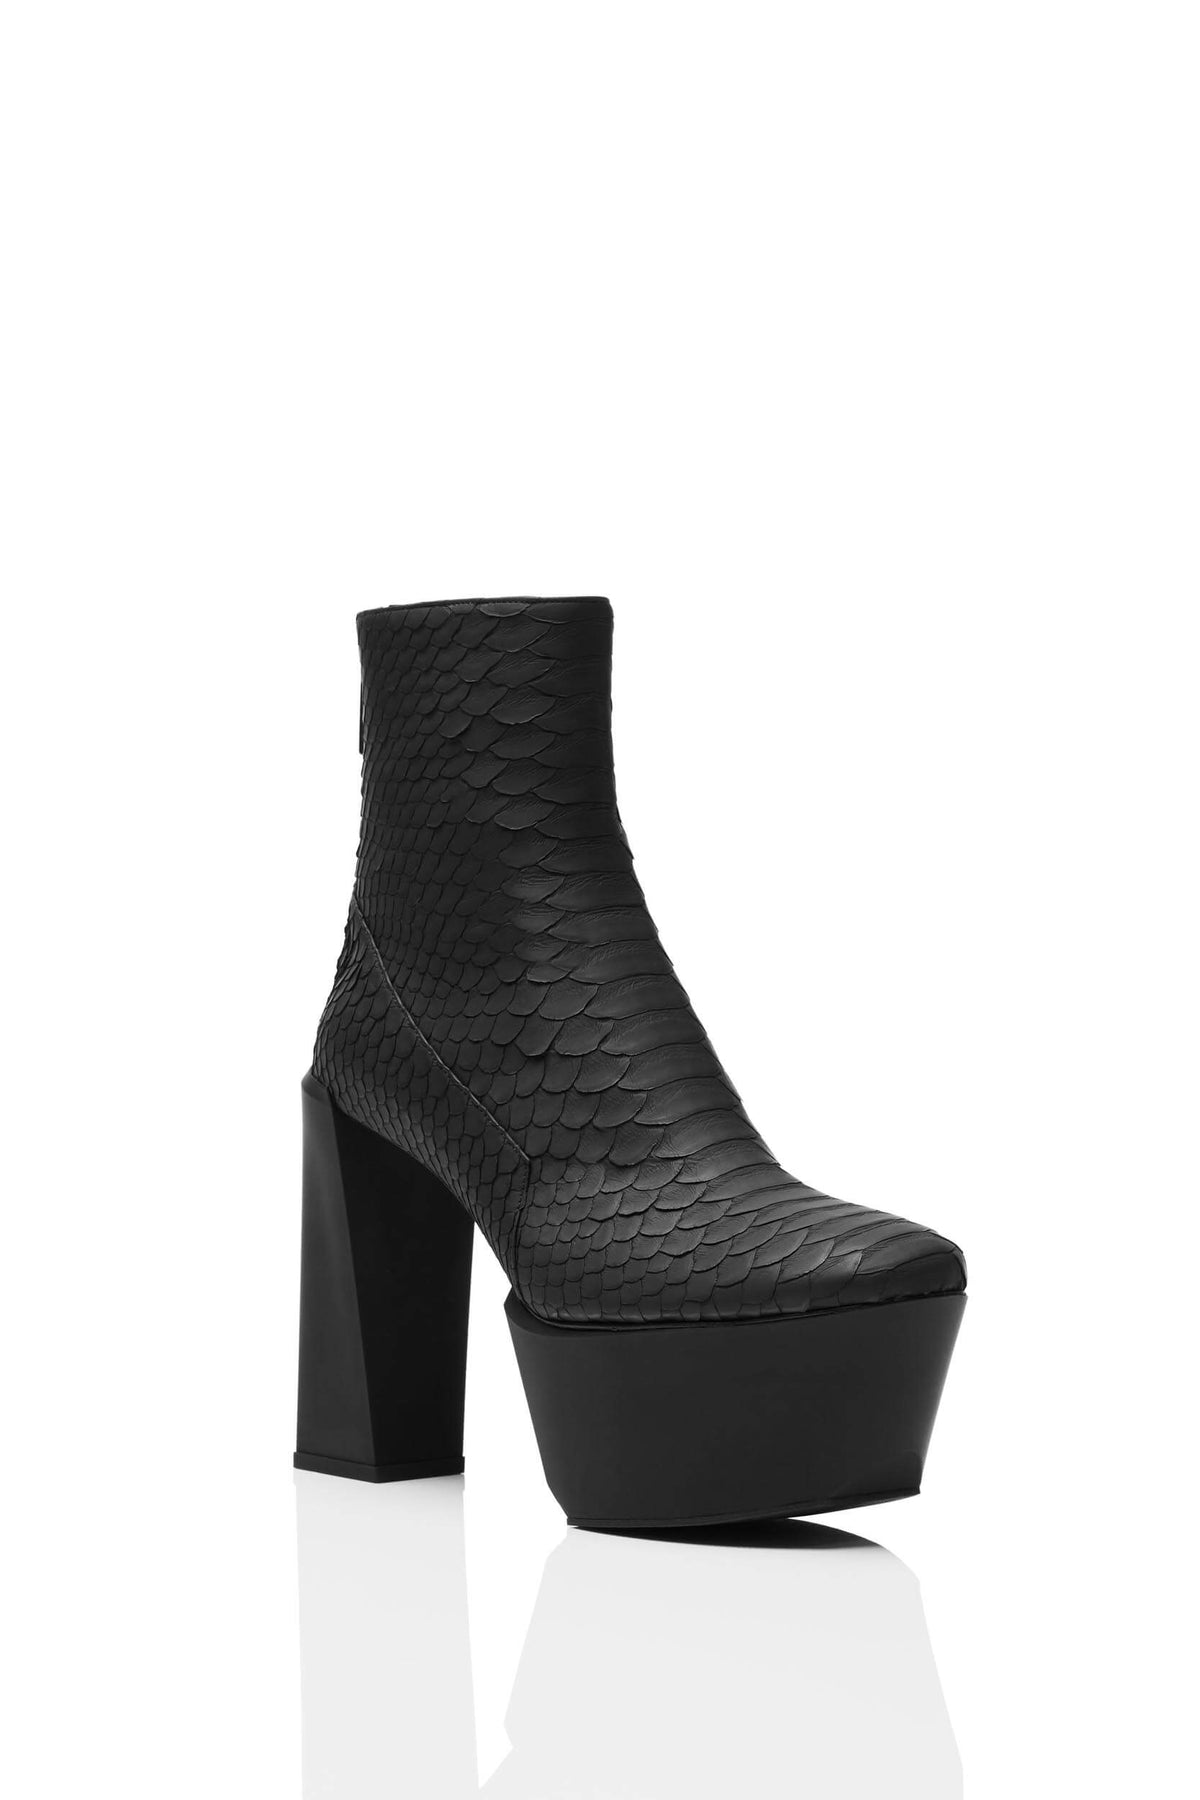 HAIKI 651 – Back zip platform boot with softly rounded toe. Finished in coated Genuine Python in black. 